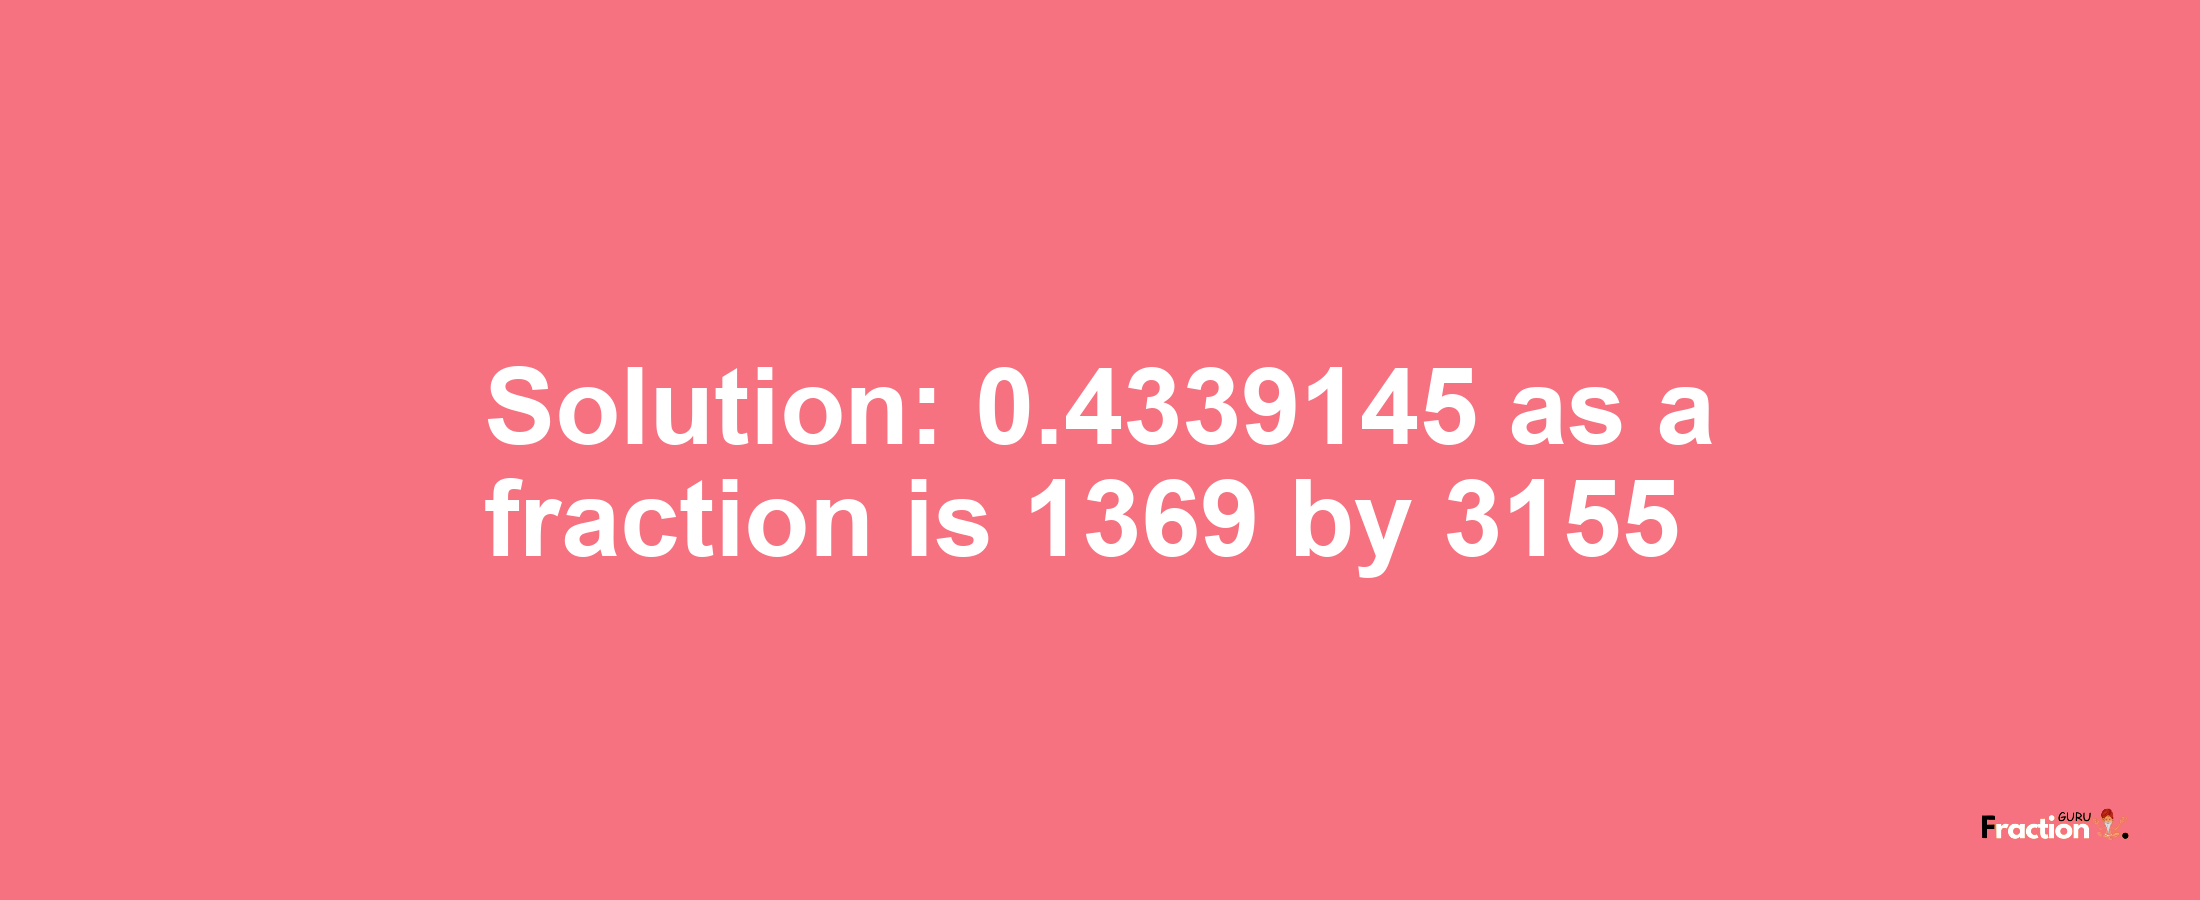 Solution:0.4339145 as a fraction is 1369/3155